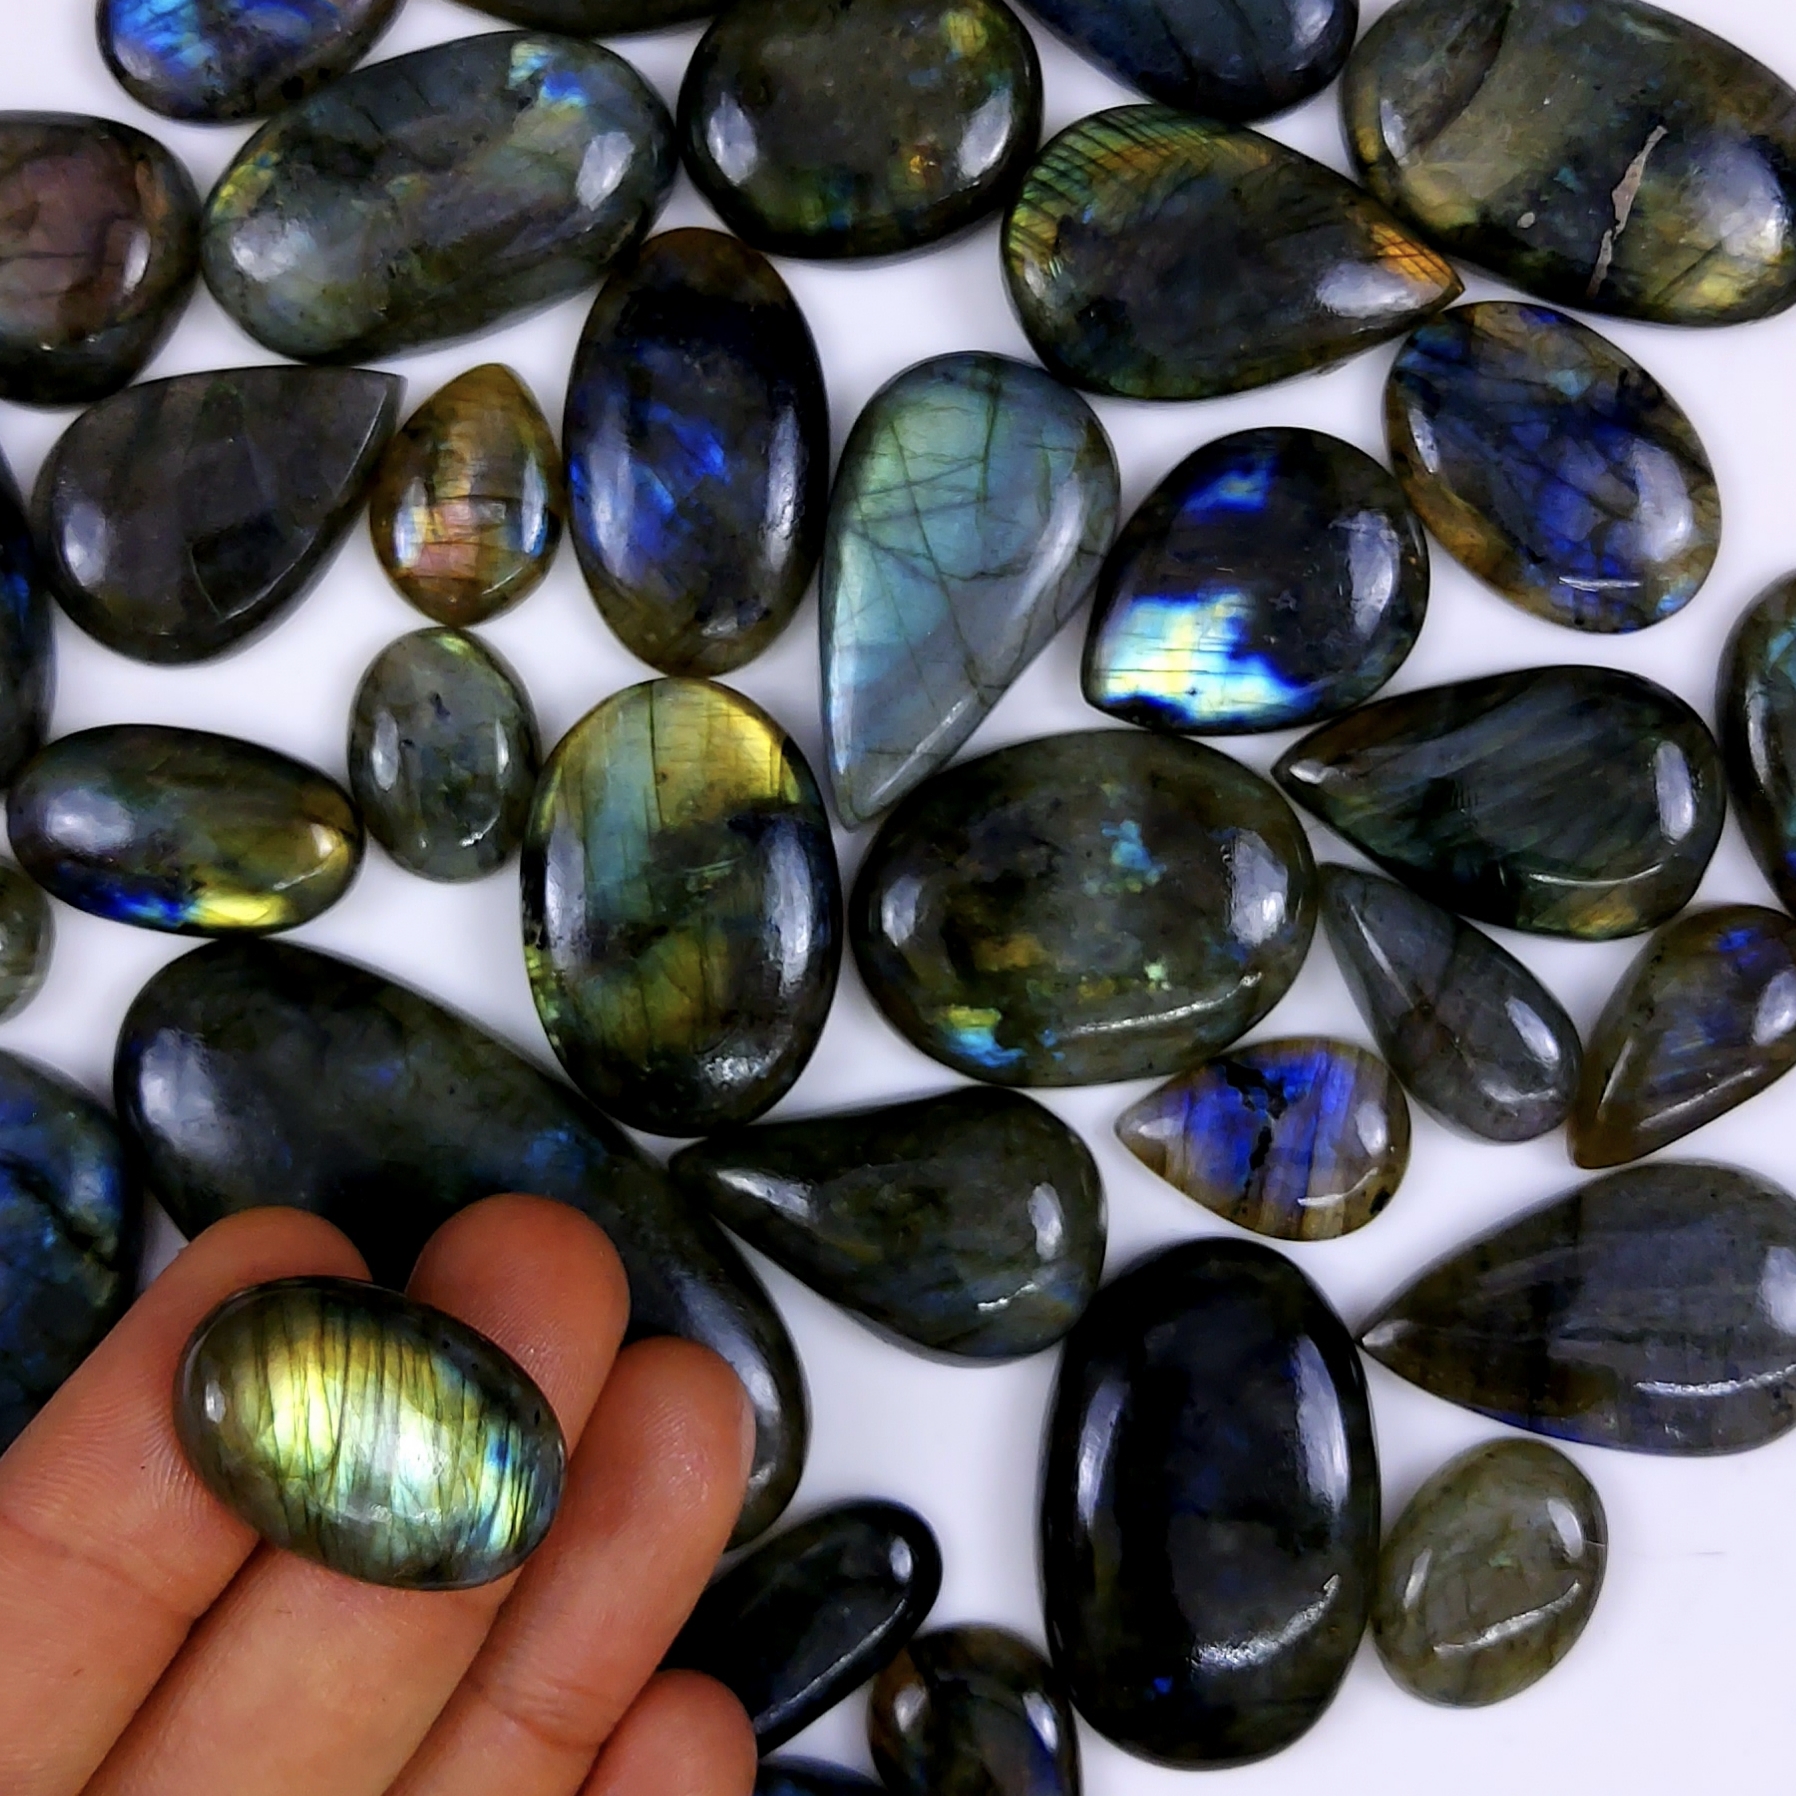 42pc 1591Cts Labradorite Cabochon Multifire Healing Crystal For Jewelry Supplies, Labradorite Necklace Handmade Wire Wrapped Gemstone Pendant 55x30 20x16mm#6313